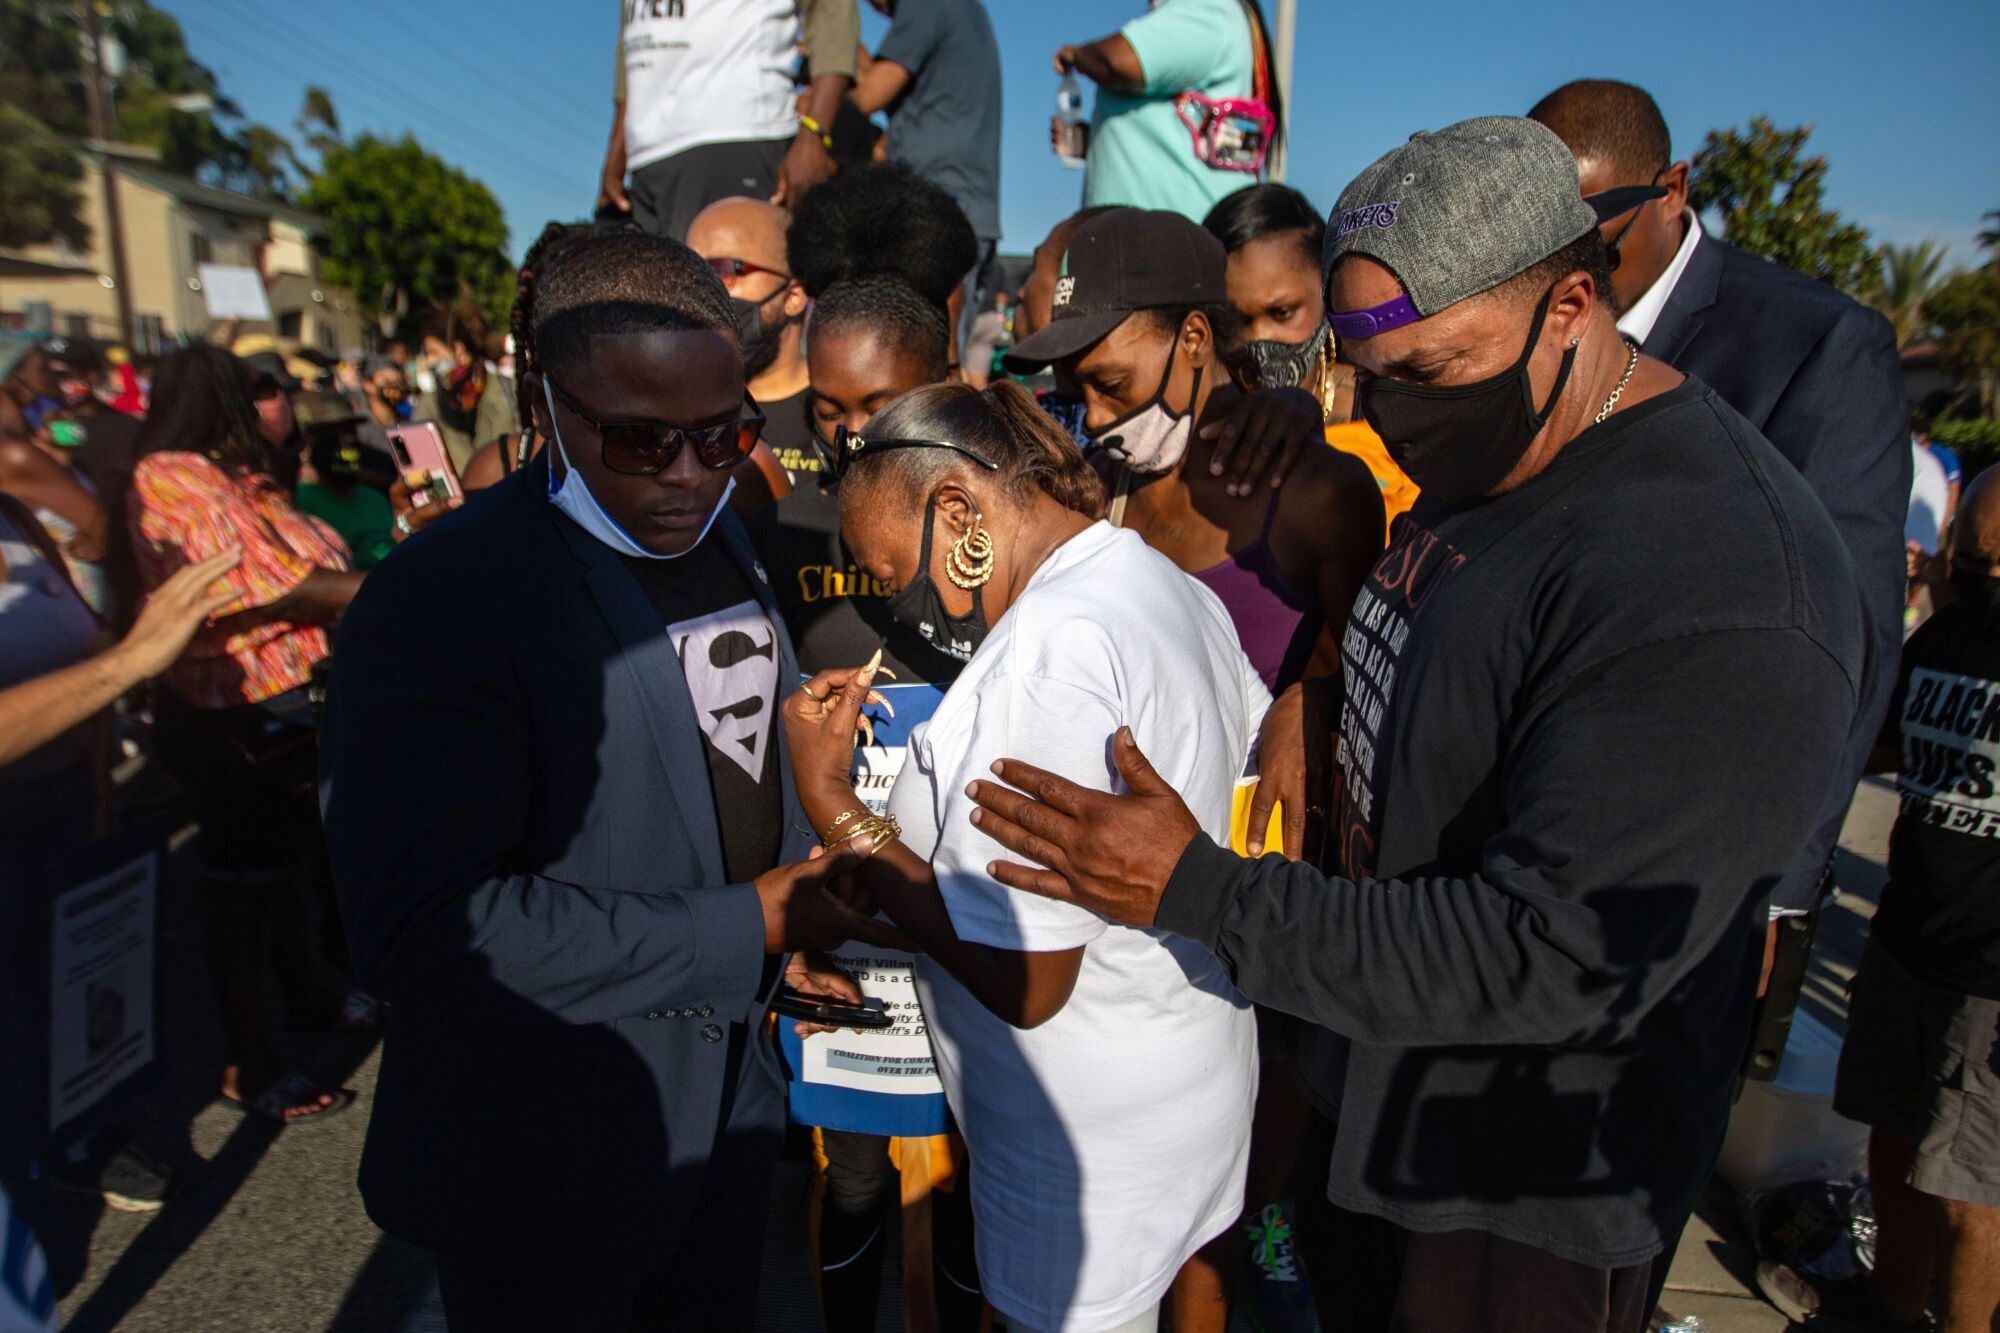 Relatives of Dijon Kizzee gather with protesters to demand justice in his fatal shooting.